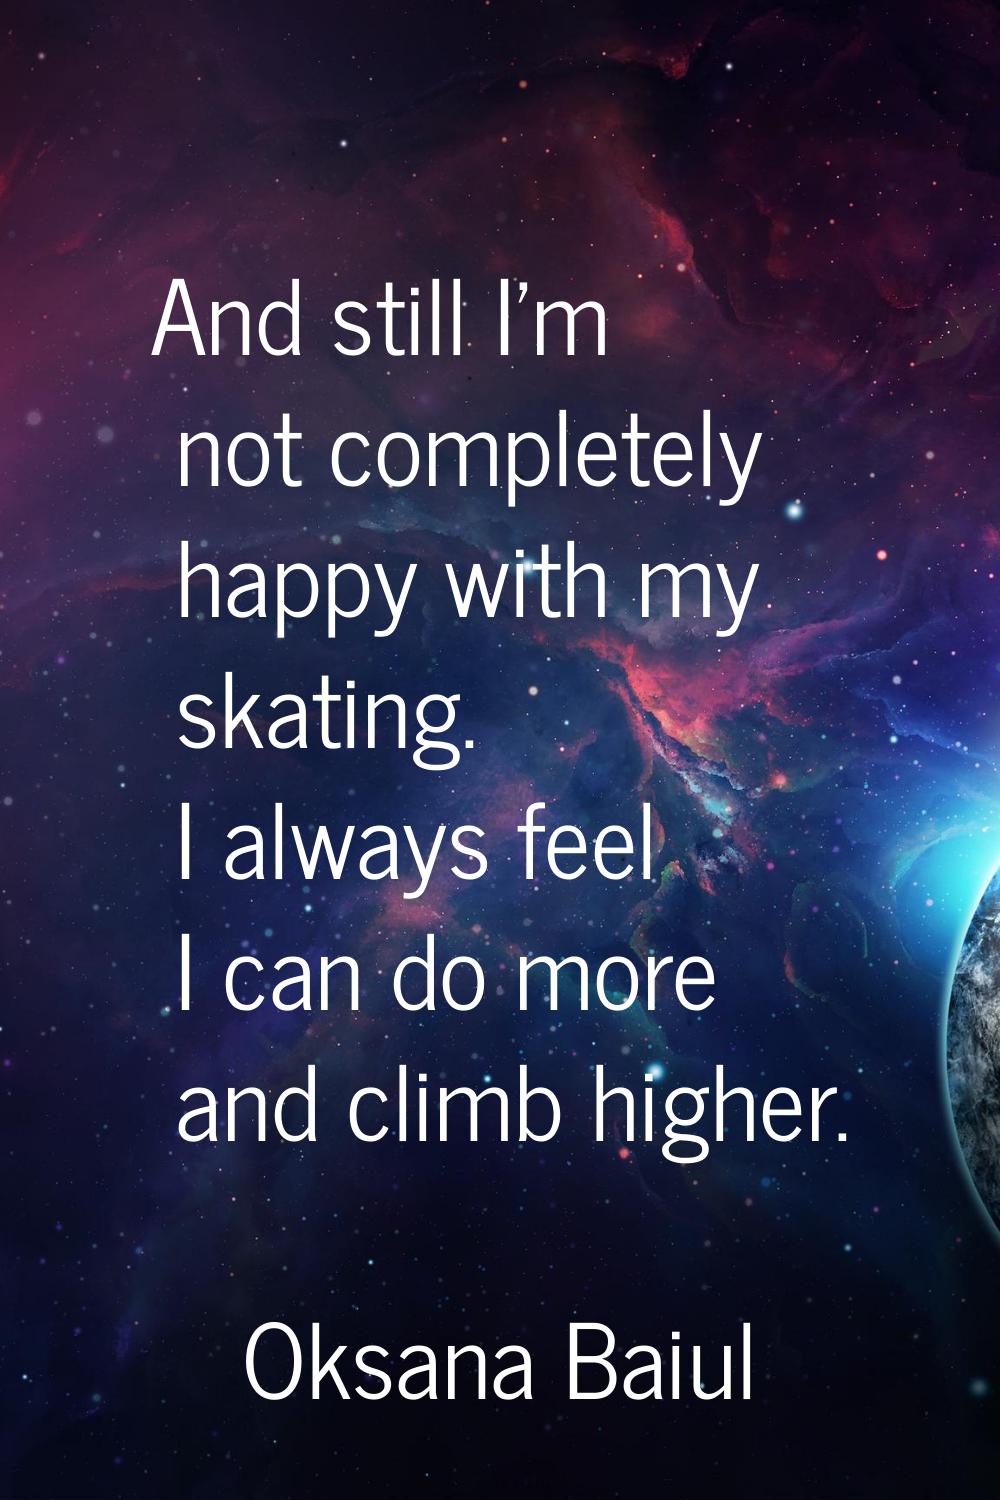 And still I'm not completely happy with my skating. I always feel I can do more and climb higher.